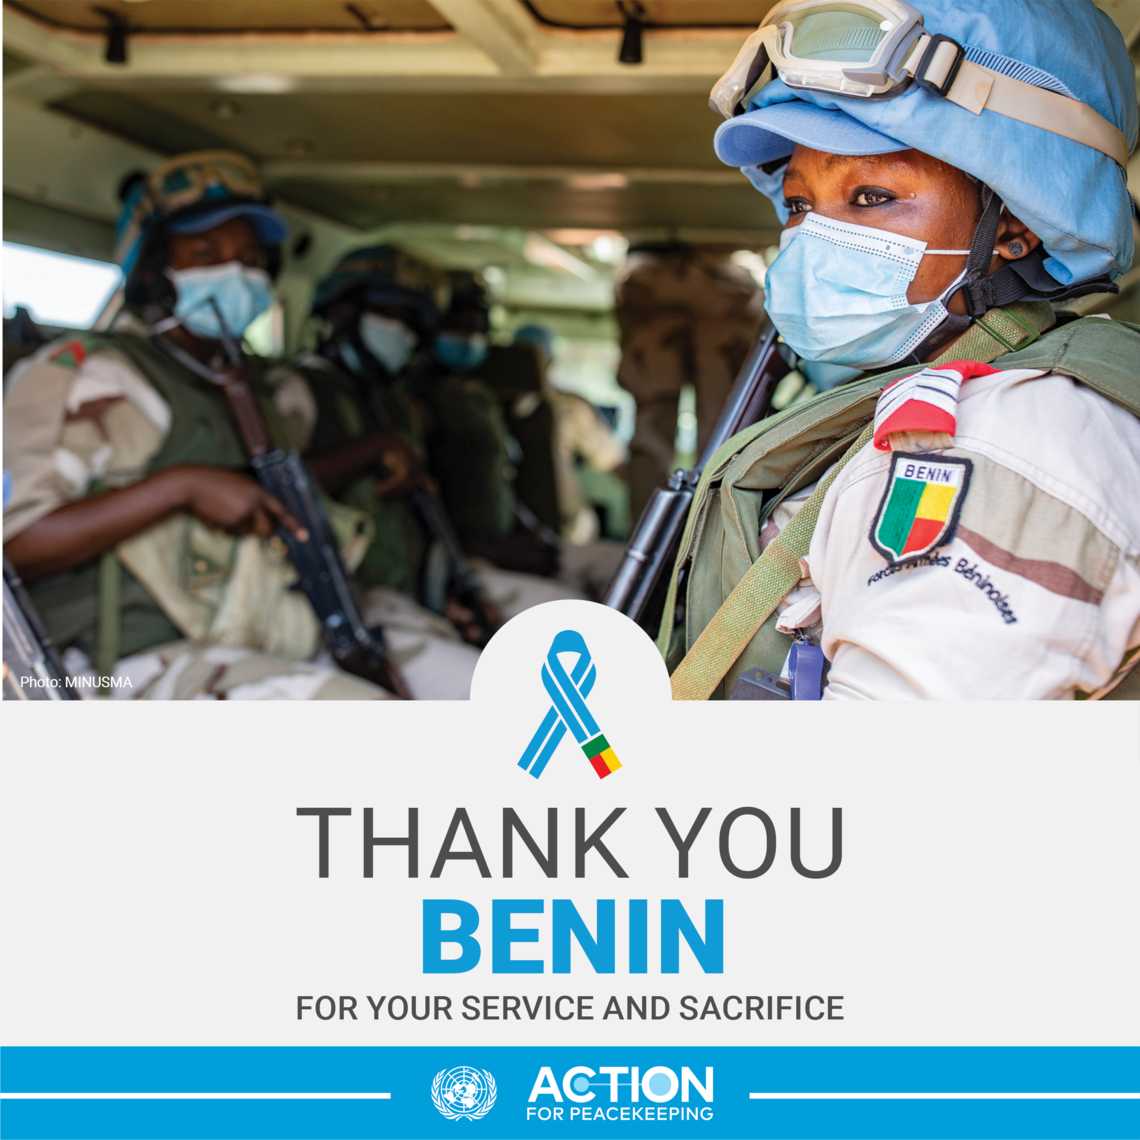 Thank you Benin for your service and sacrifice